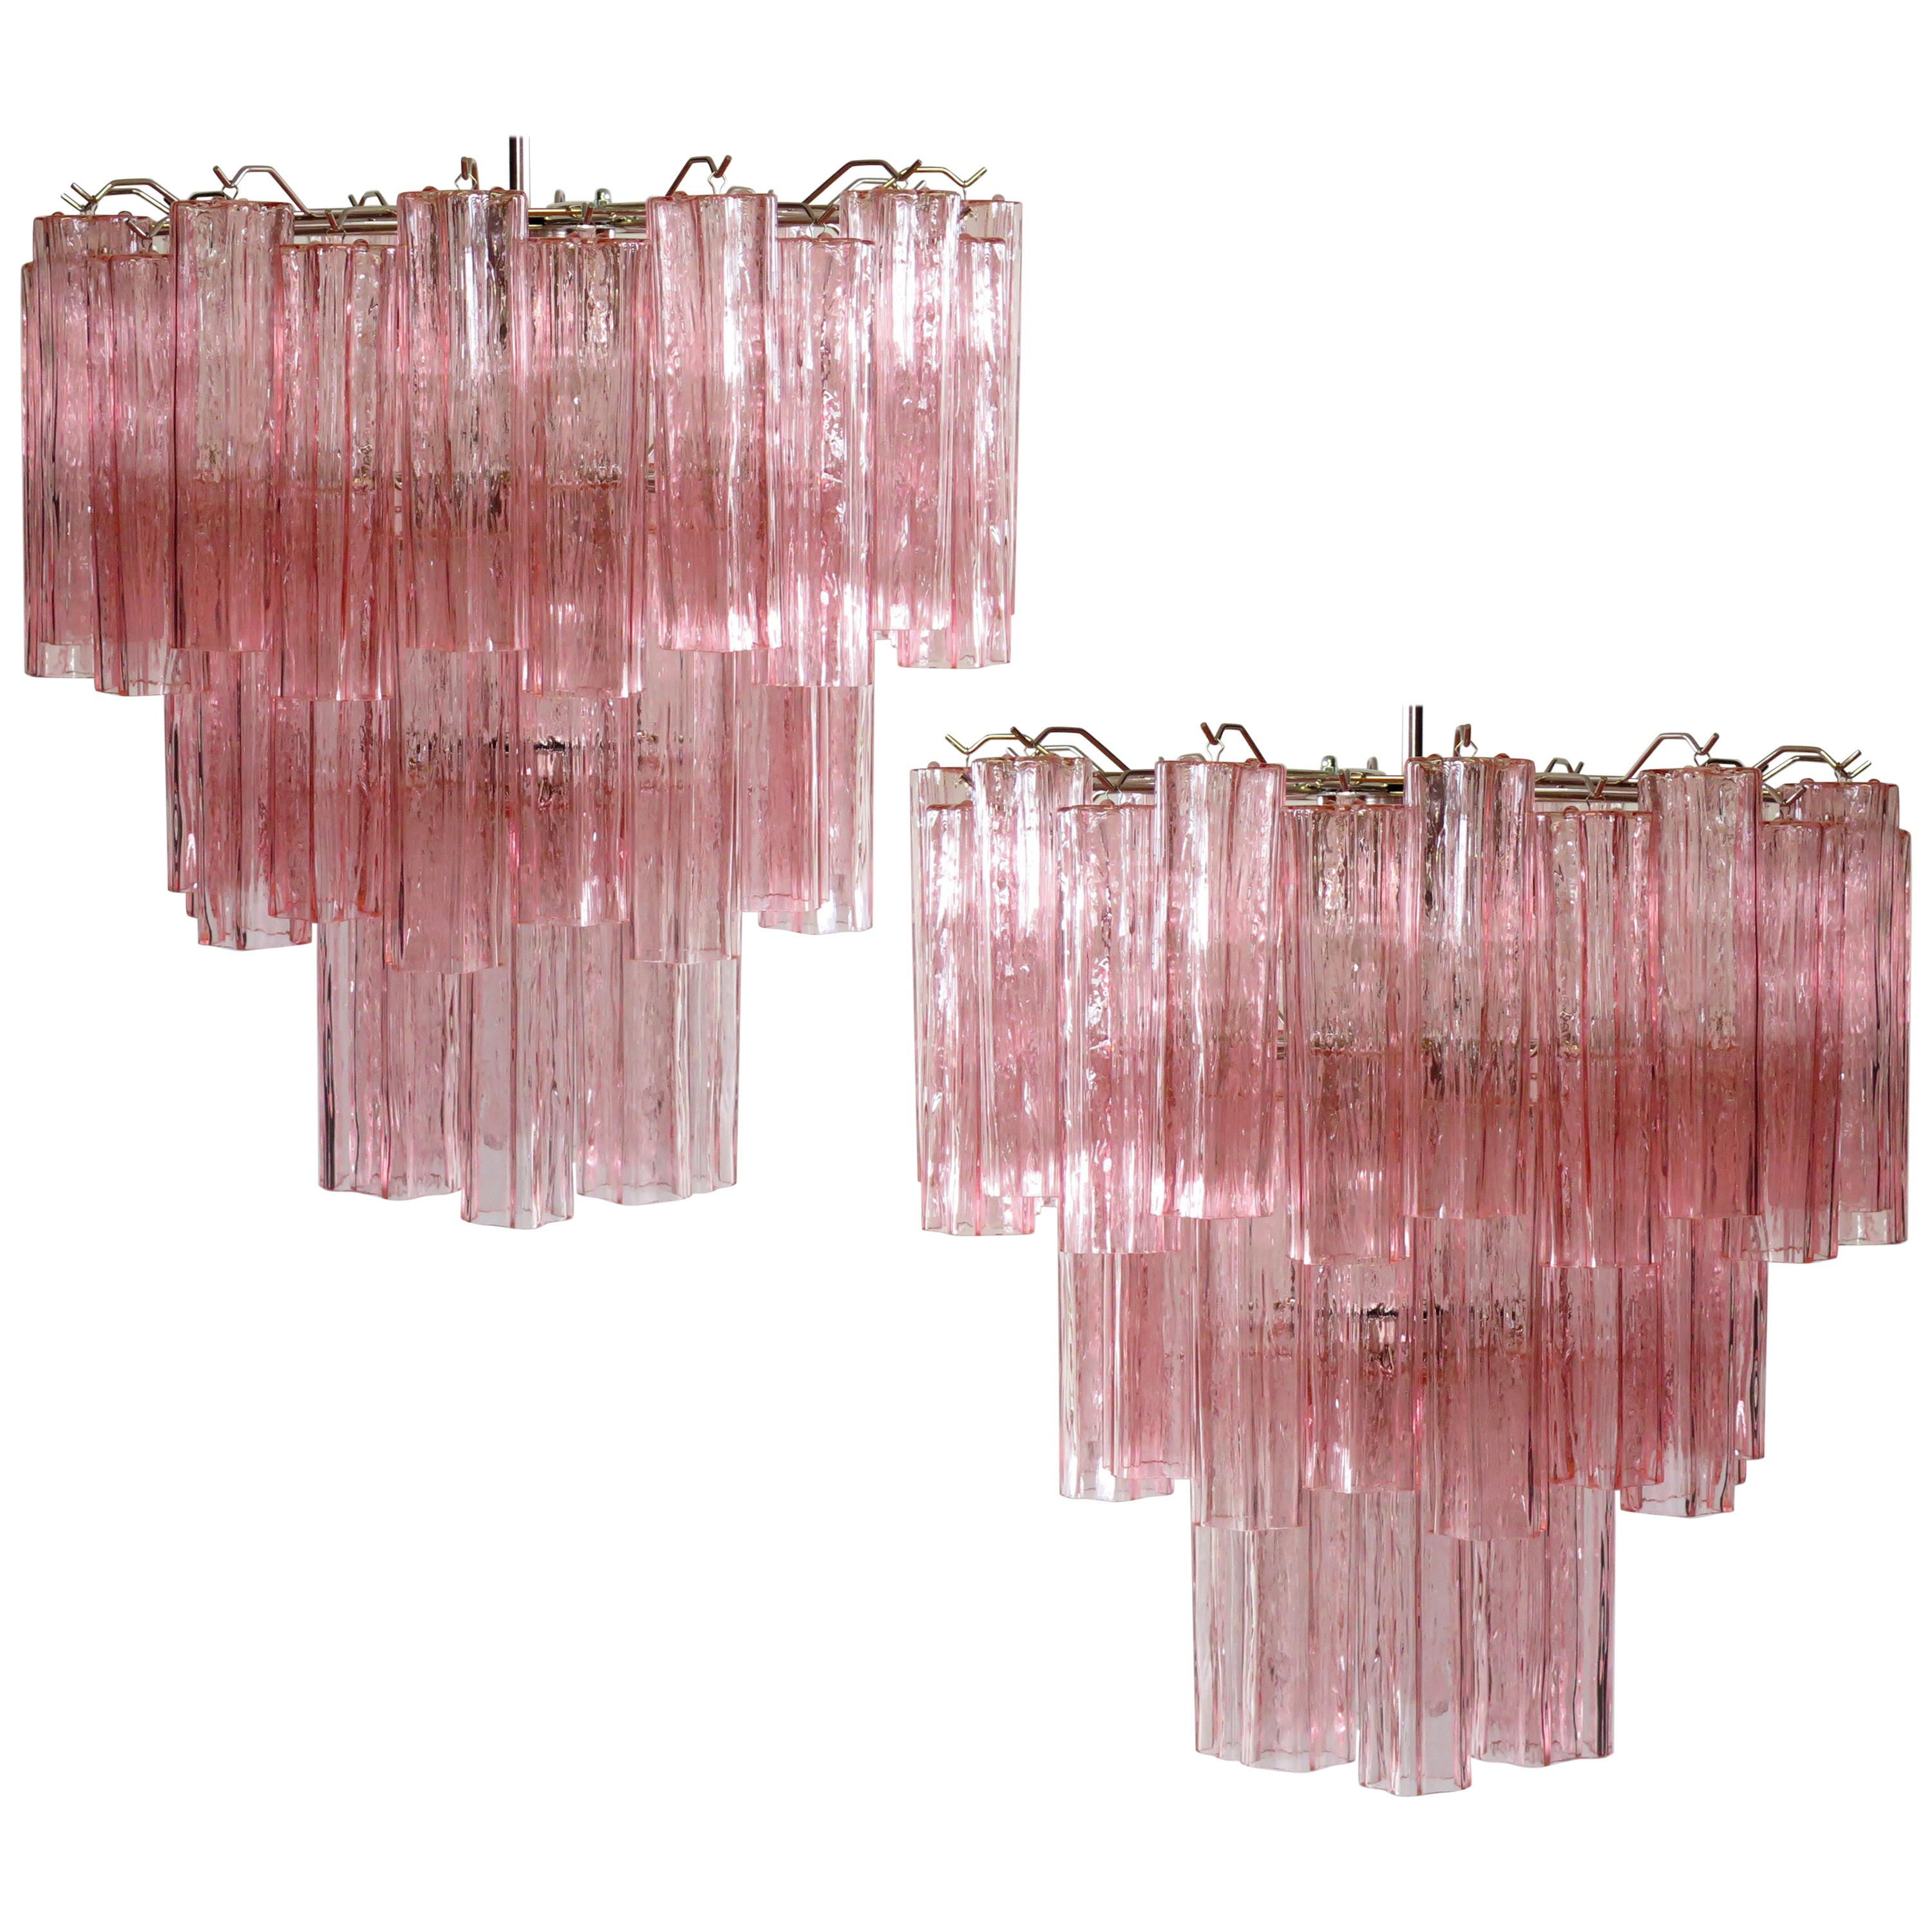 Three-tier Murano glass tube chandelier, 48 pink glasses, Mid-Century Modern
Italian vintage chandelier in Murano glass and nickel-plated metal structure. The armor polished nickel supports 48 large pink glass tubes in a star shape. The glasses